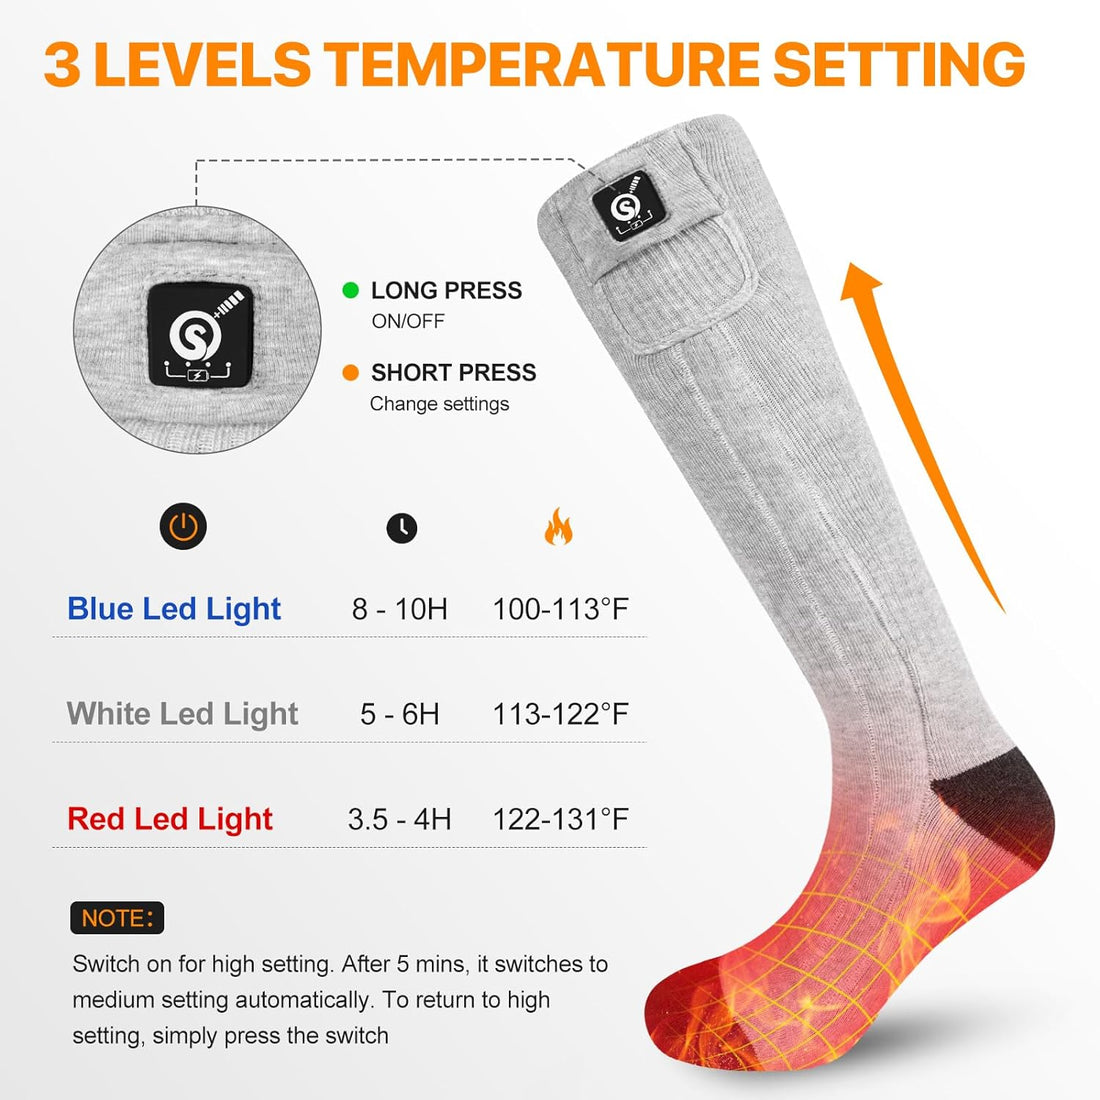 SNOW DEER Upgraded Heated Socks,Electric Rechargeable Battery Heating Socks for Men Women,Winter Ski Hunting Camping Hiking Riding Motorcycle Warm Cotton Socks Foot Warmer